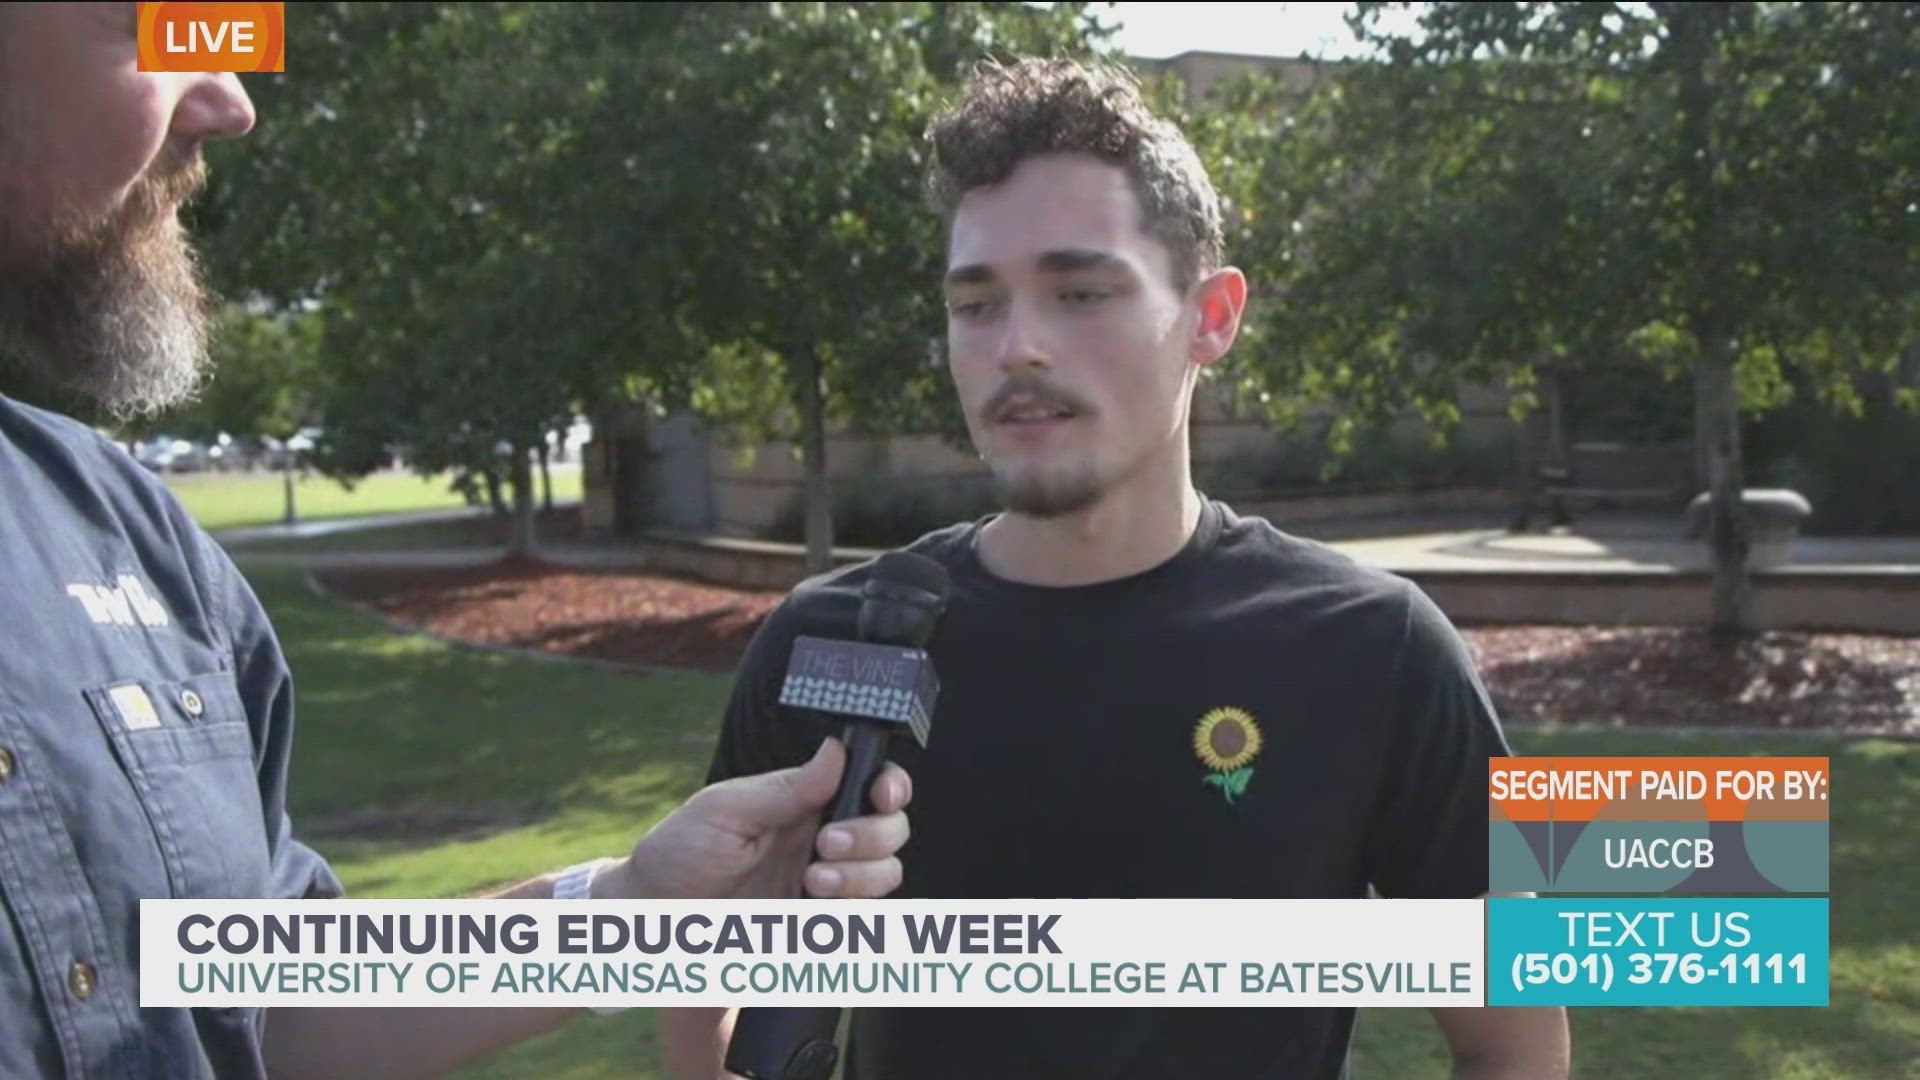 University of Arkansas Community College at Batesville student, Will Jones, tells us about his time on campus.